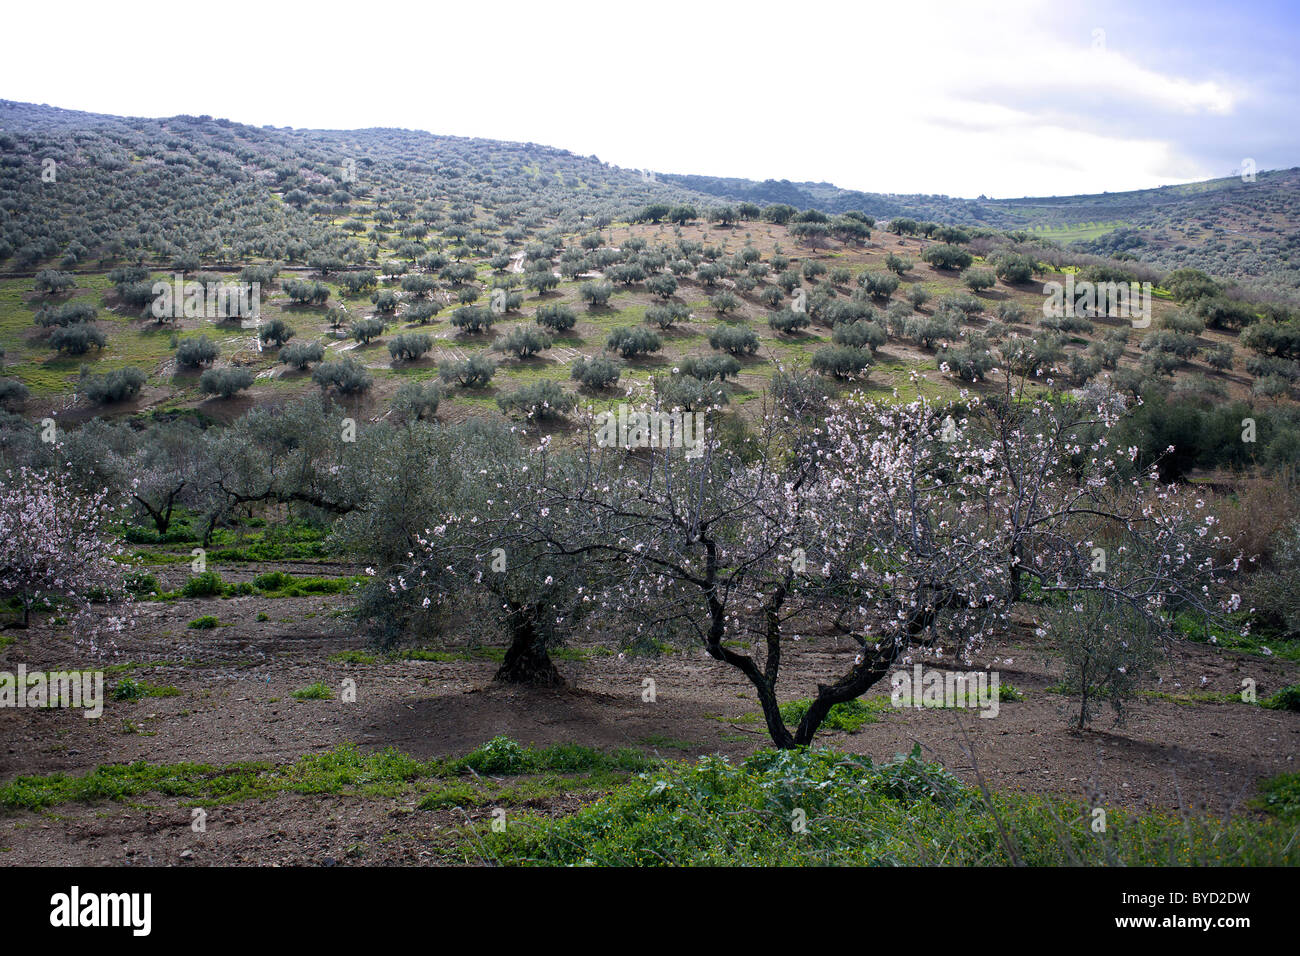 Almond trees in blossom, olive trees in the background, February, Andalucia, Spain, Europe, European, Spanish, Andalucia, Stock Photo